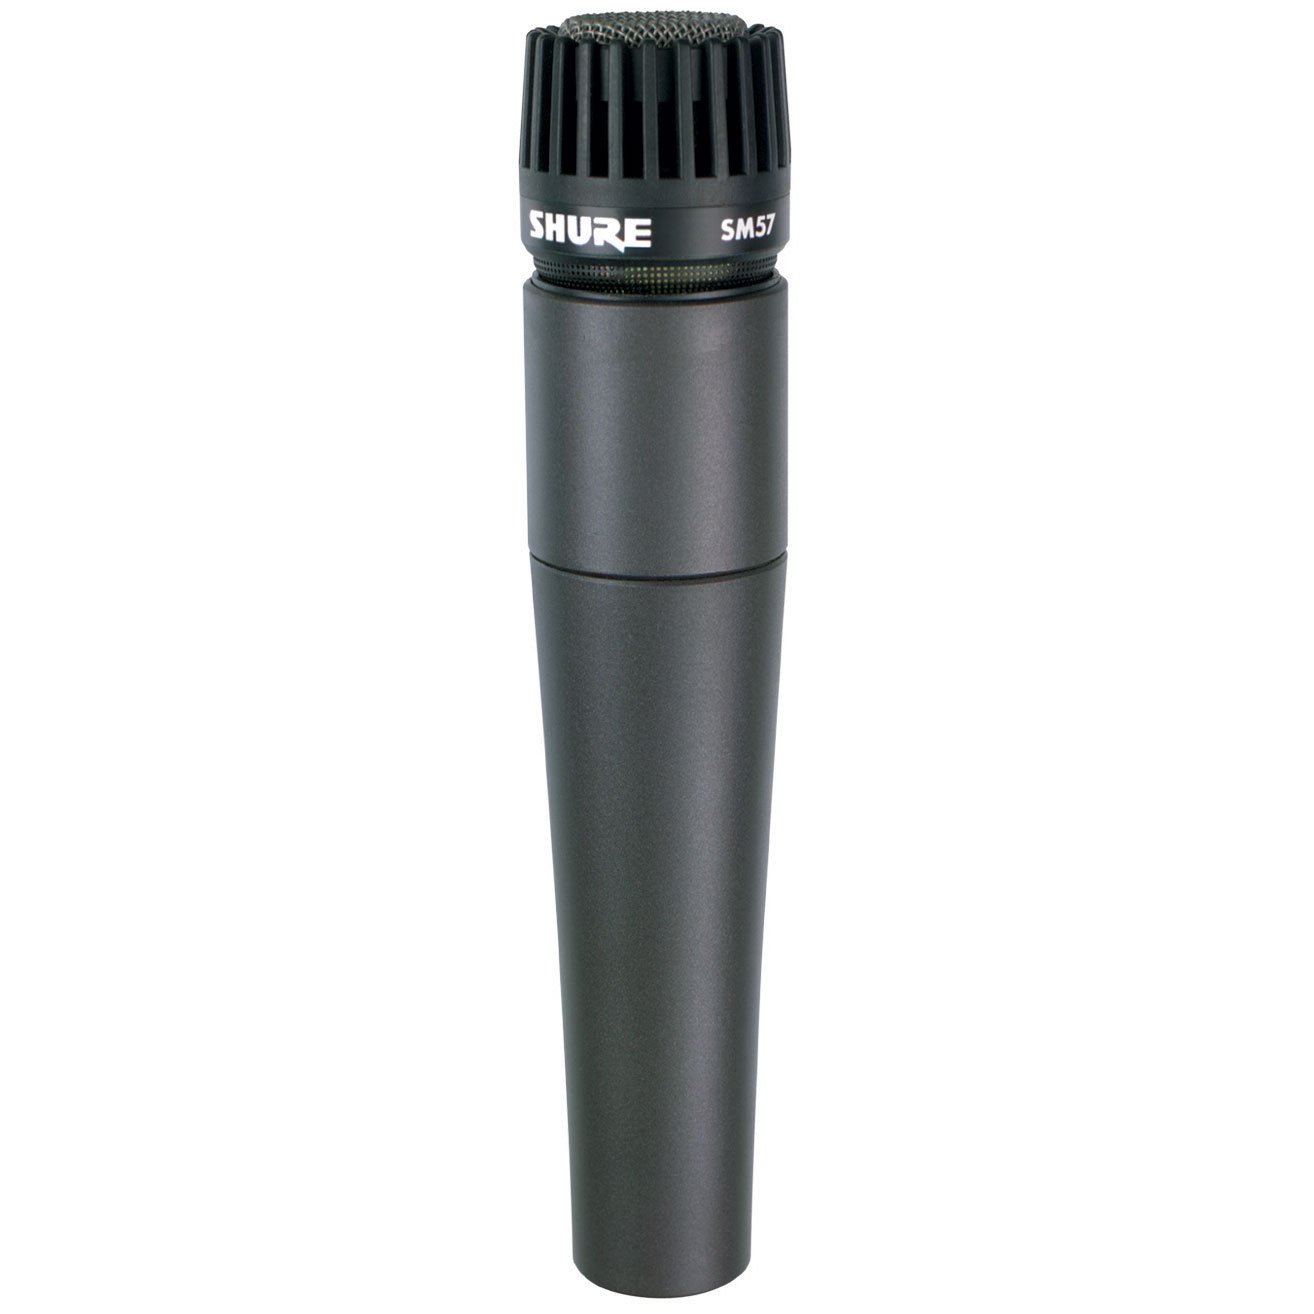 Shure SM57 microphone placed vertically against a white background.